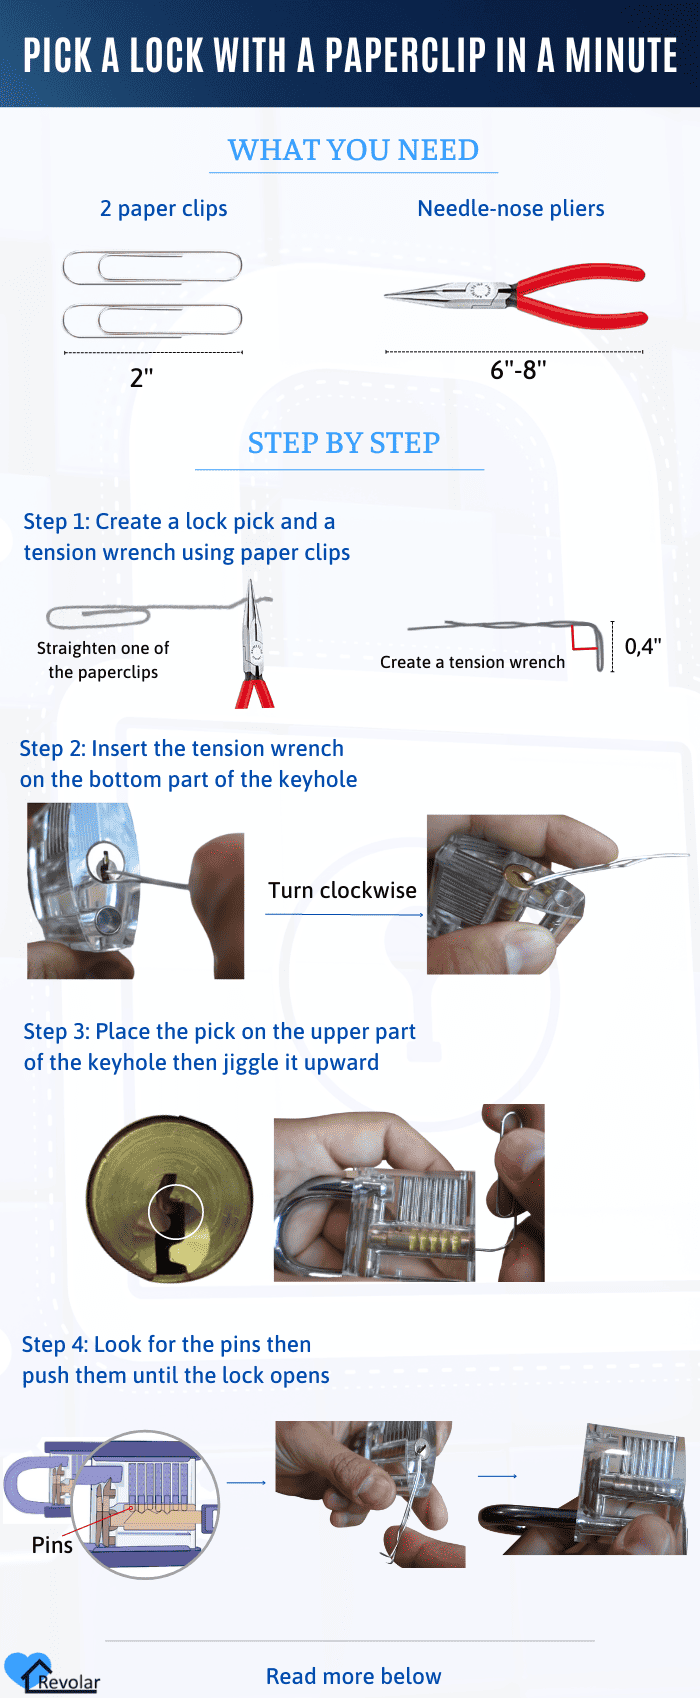 pick-the-lock-with-a-paperclip